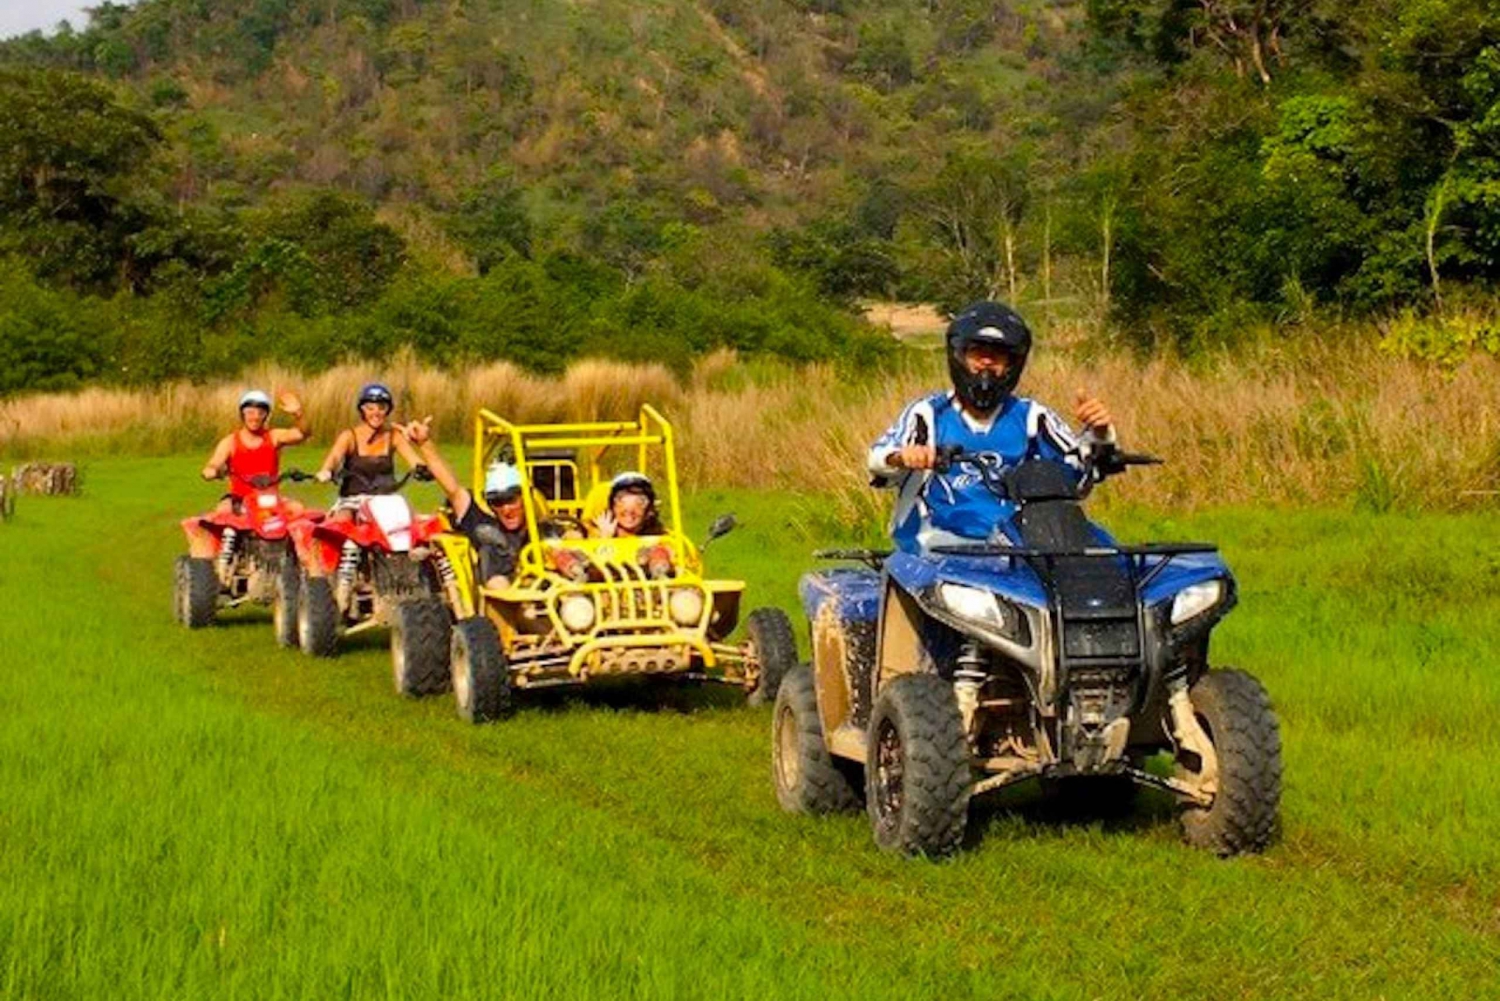 Pattaya: 2-Hour ATV Off-Road Adventure Tour with Meal